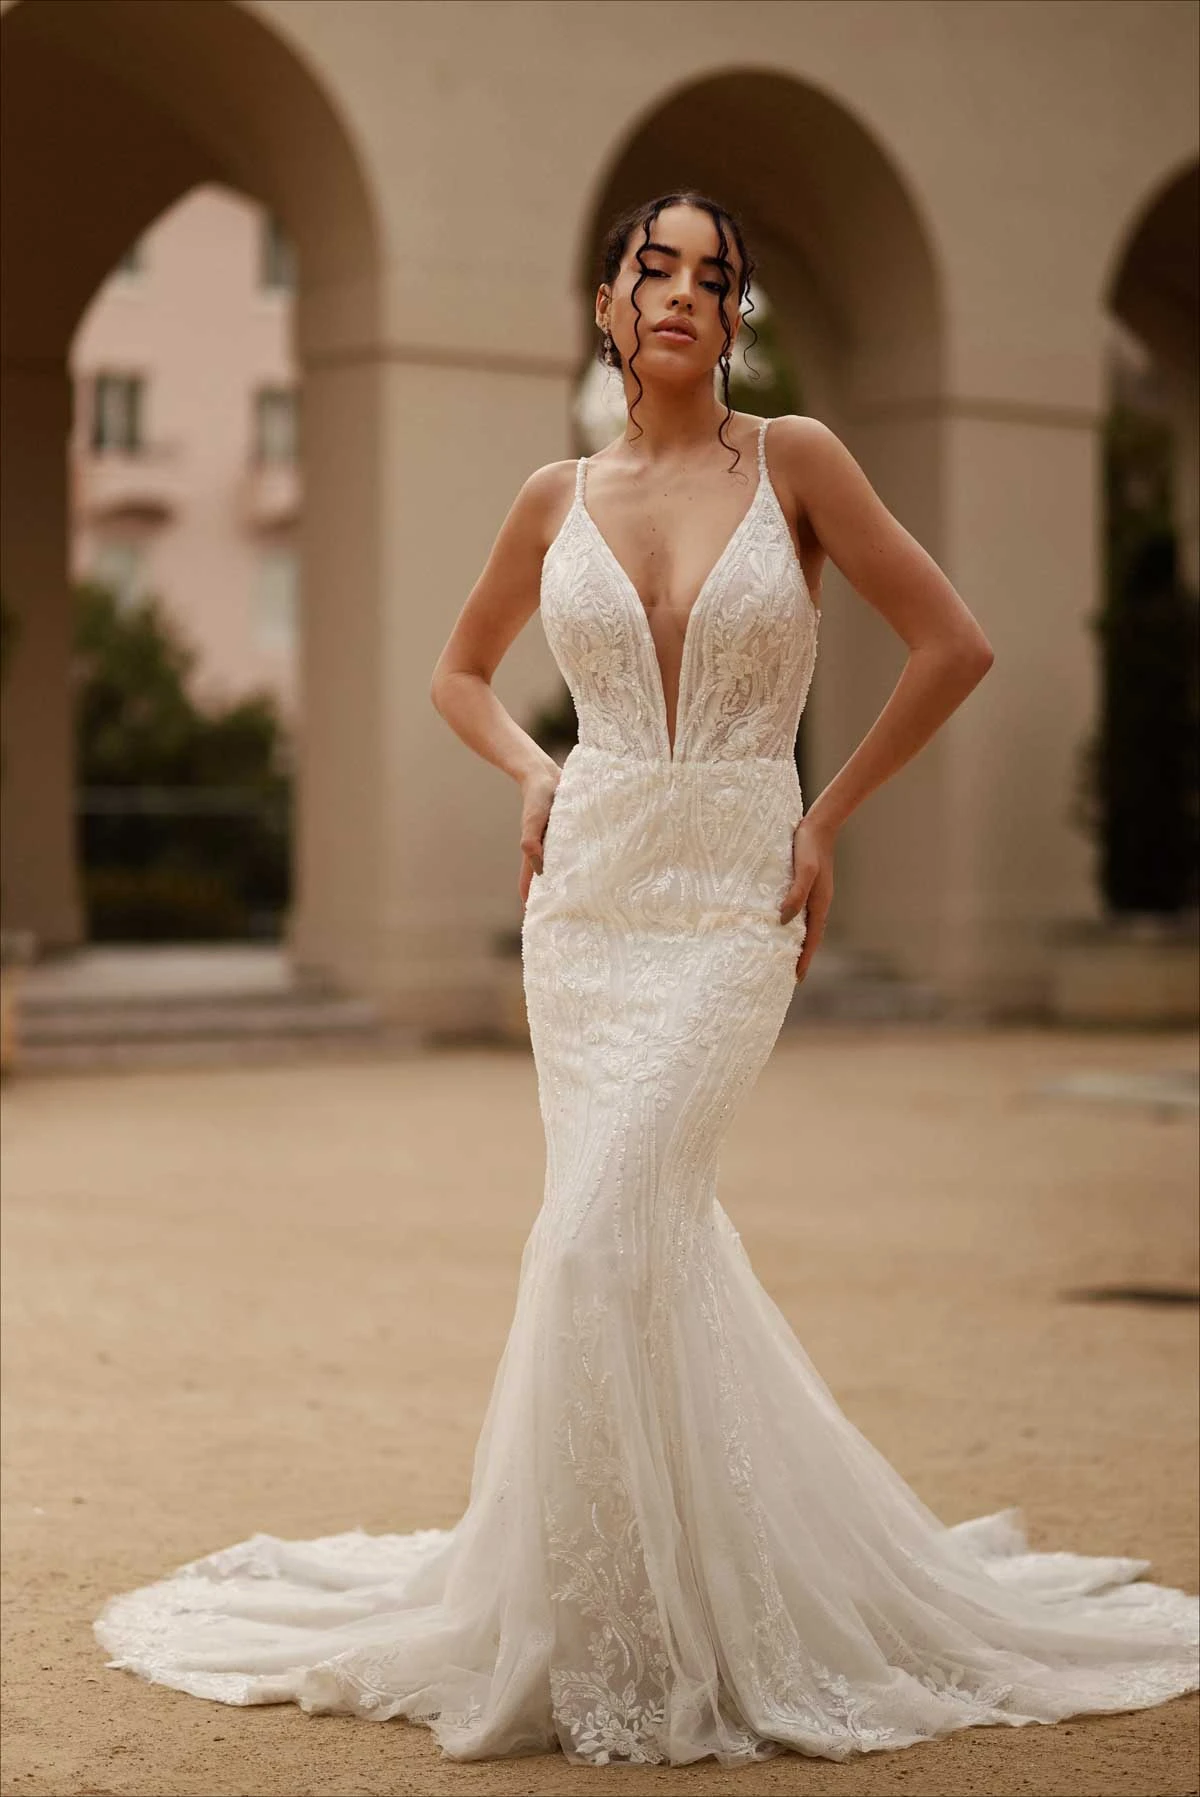 1651 Sparkling Beaded Lace Fit-and-Flare Wedding Dress with Plunging Neckline and Spaghetti Straps  by Martina Liana